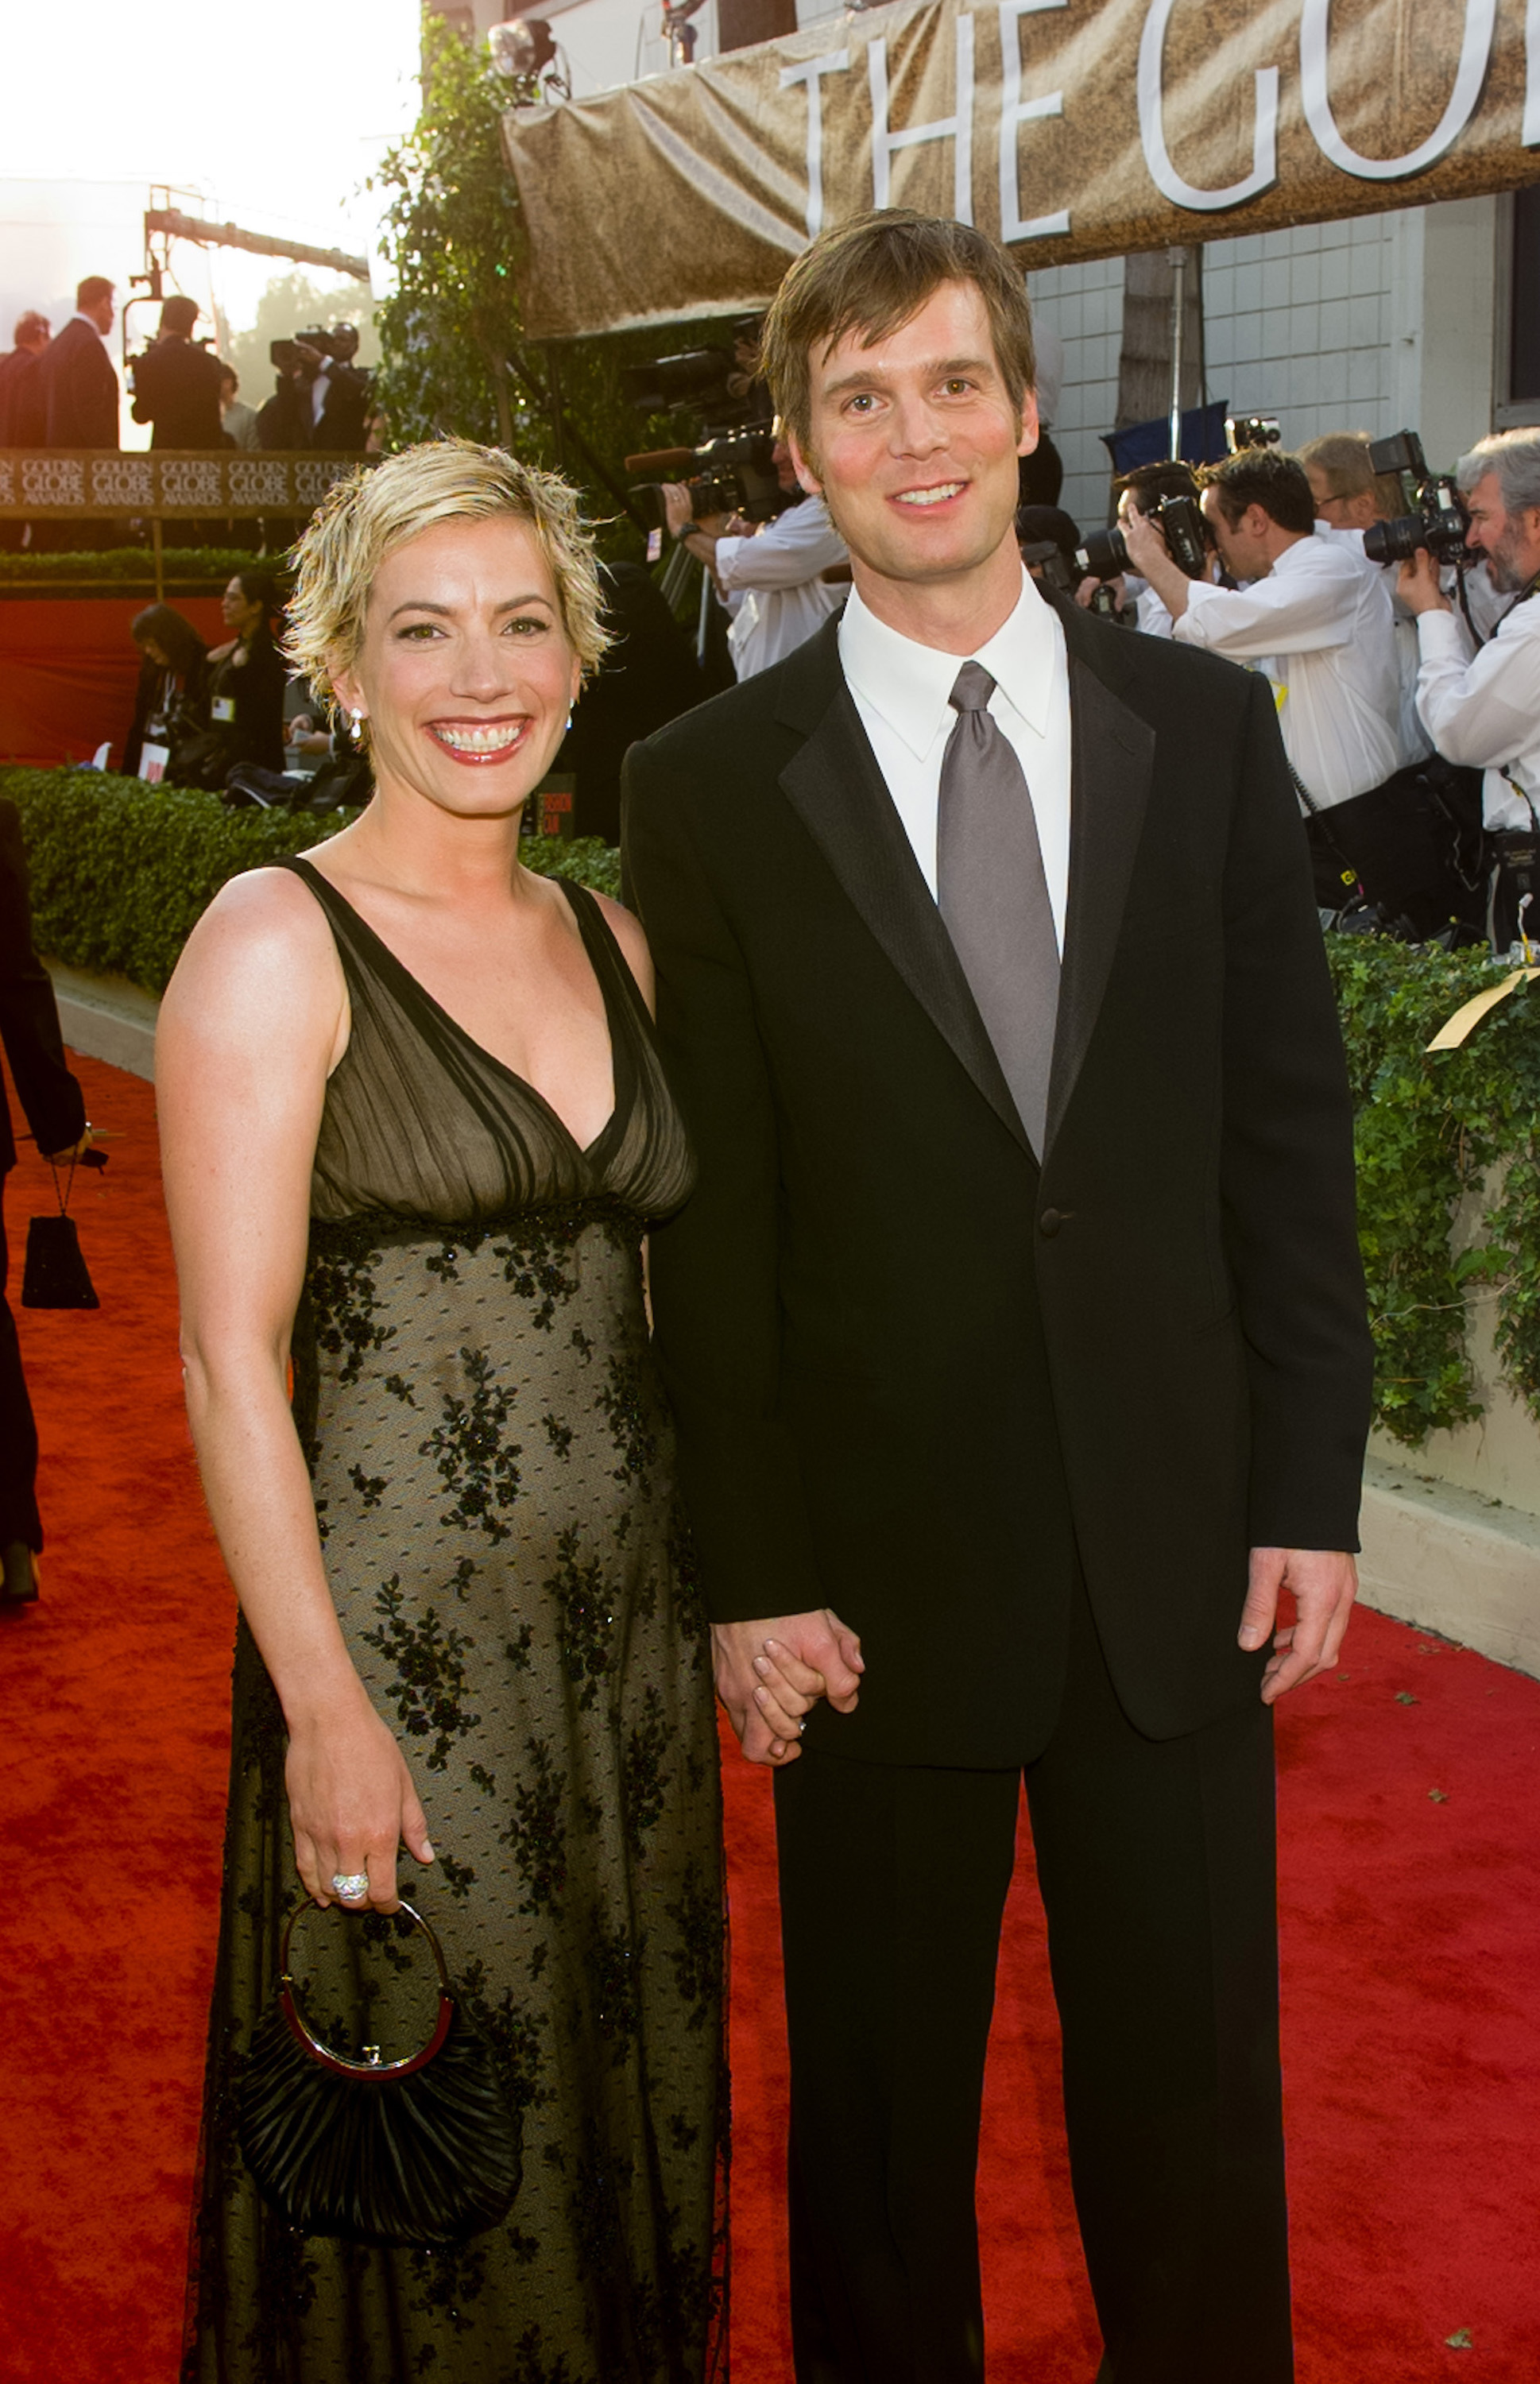 Christine King and Peter Krause arrive at the 60th Annual Golden Globe Awards at the Beverly Hilton Hotel on January 19, 2003, in Beverly Hills, California. | Source: Getty Images